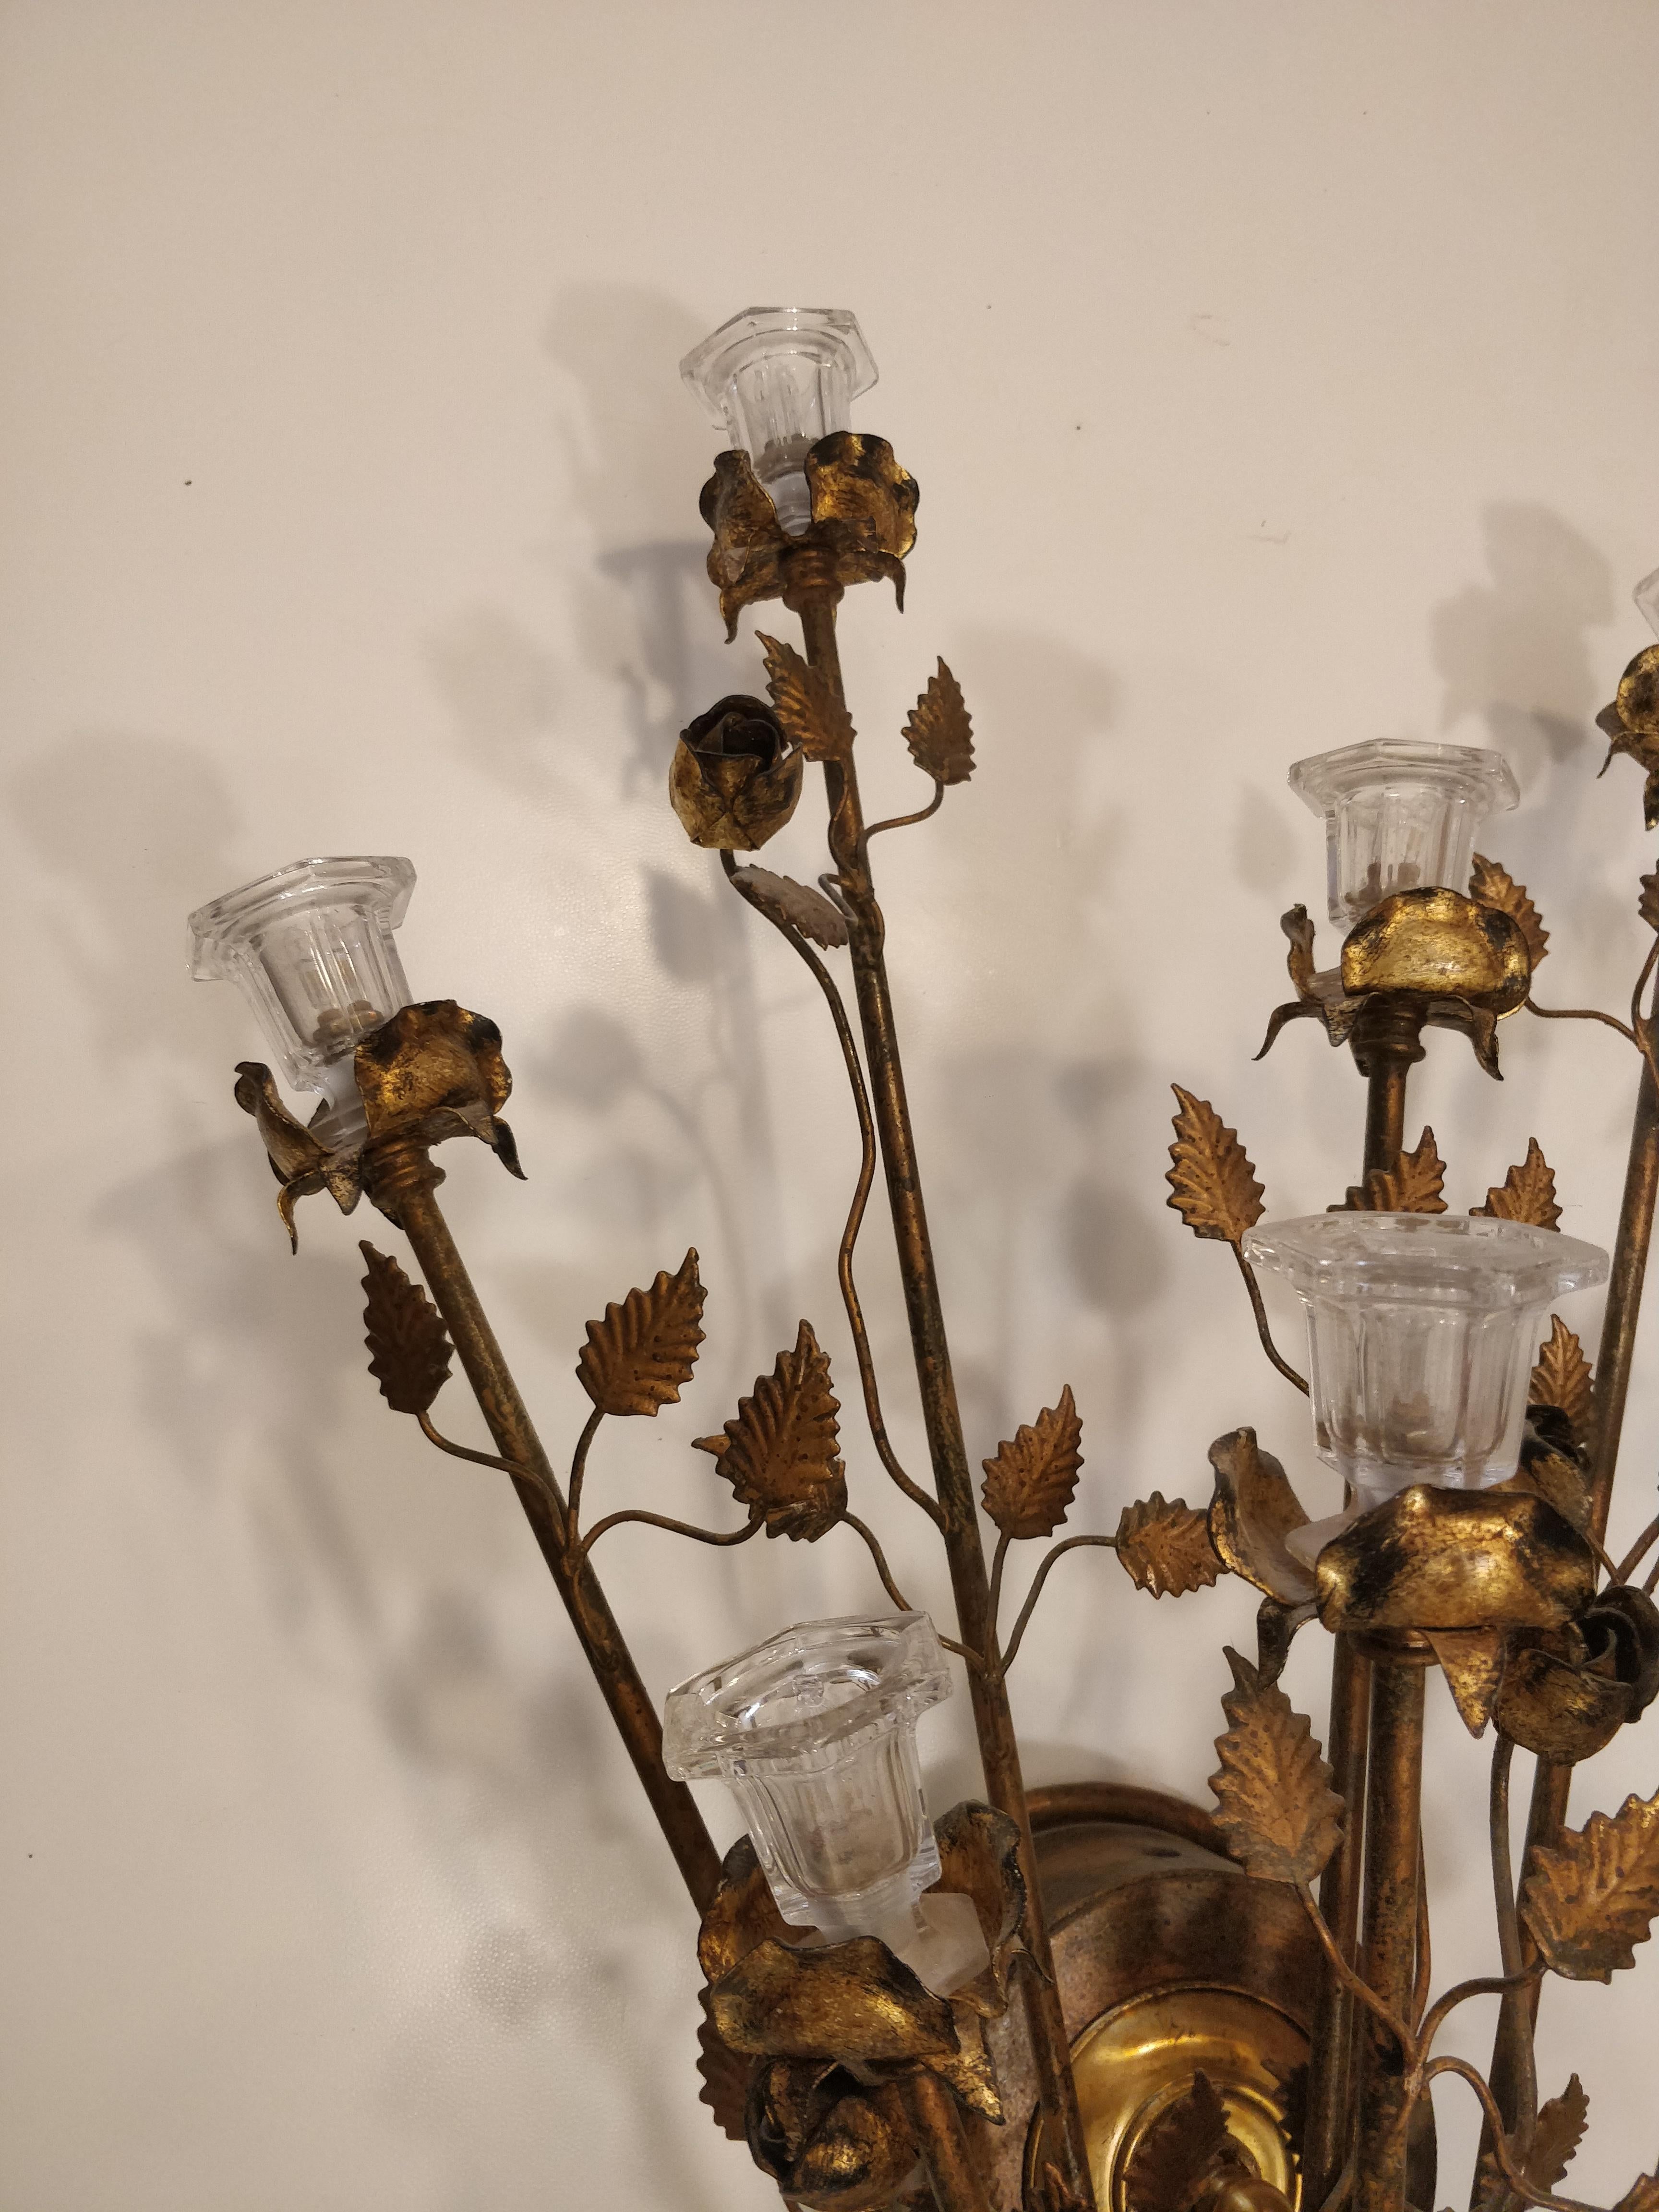 Wall lamp produced around 1970s by Banci (Florence), a renowned Italian company. The sconce features a charming and detailed design, the main body is made of gold-tone metal with branches and roses extending from the base adding a sense of movement.